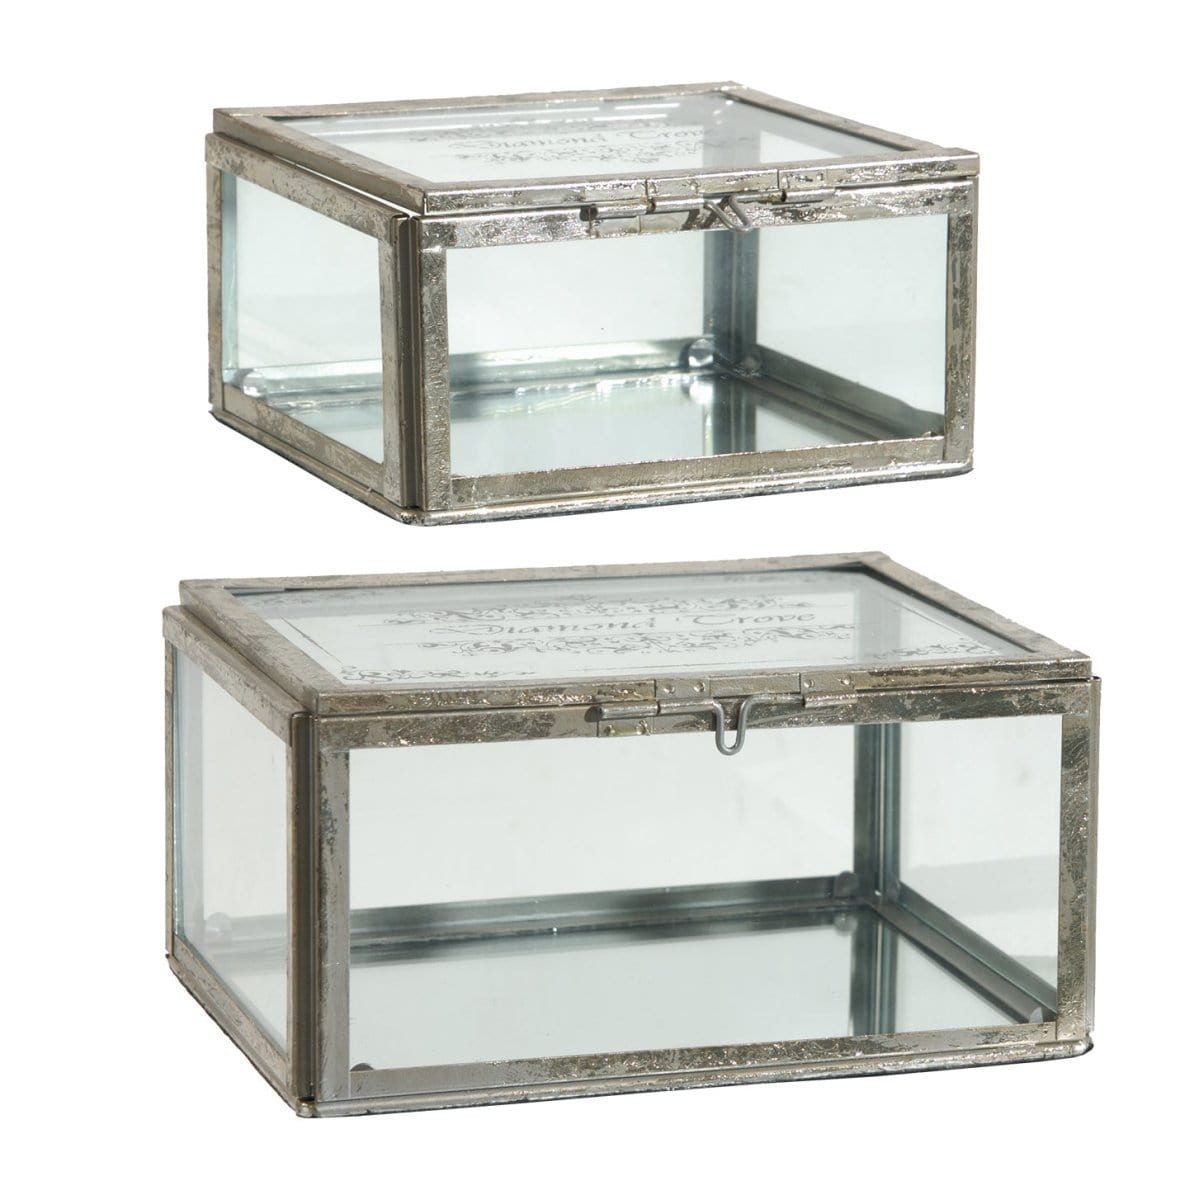 AB-35238 S/2 JEWELRY BOXES picket and rail